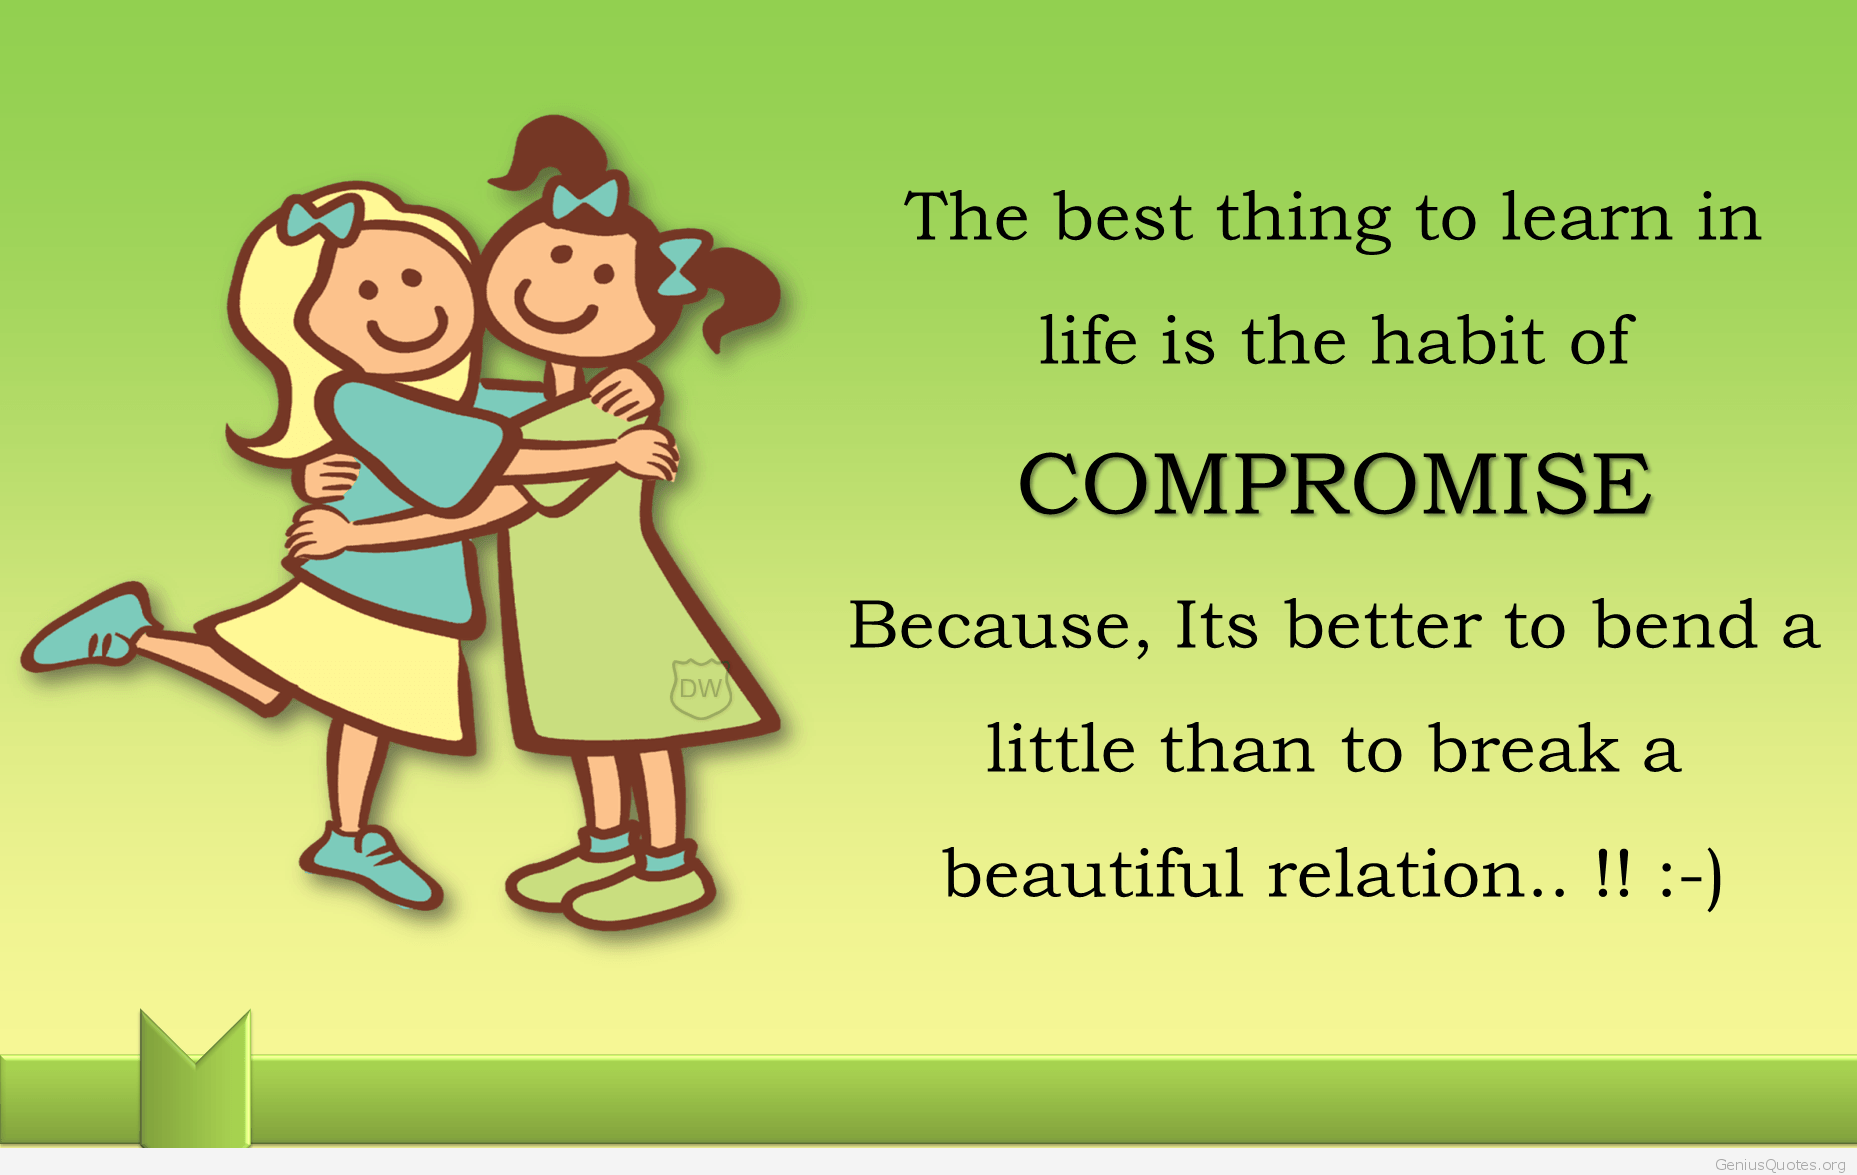 The best thing to learn in life is the habit of COMPROMISE. Because, Its better to bend a little than to break a beautiful relation